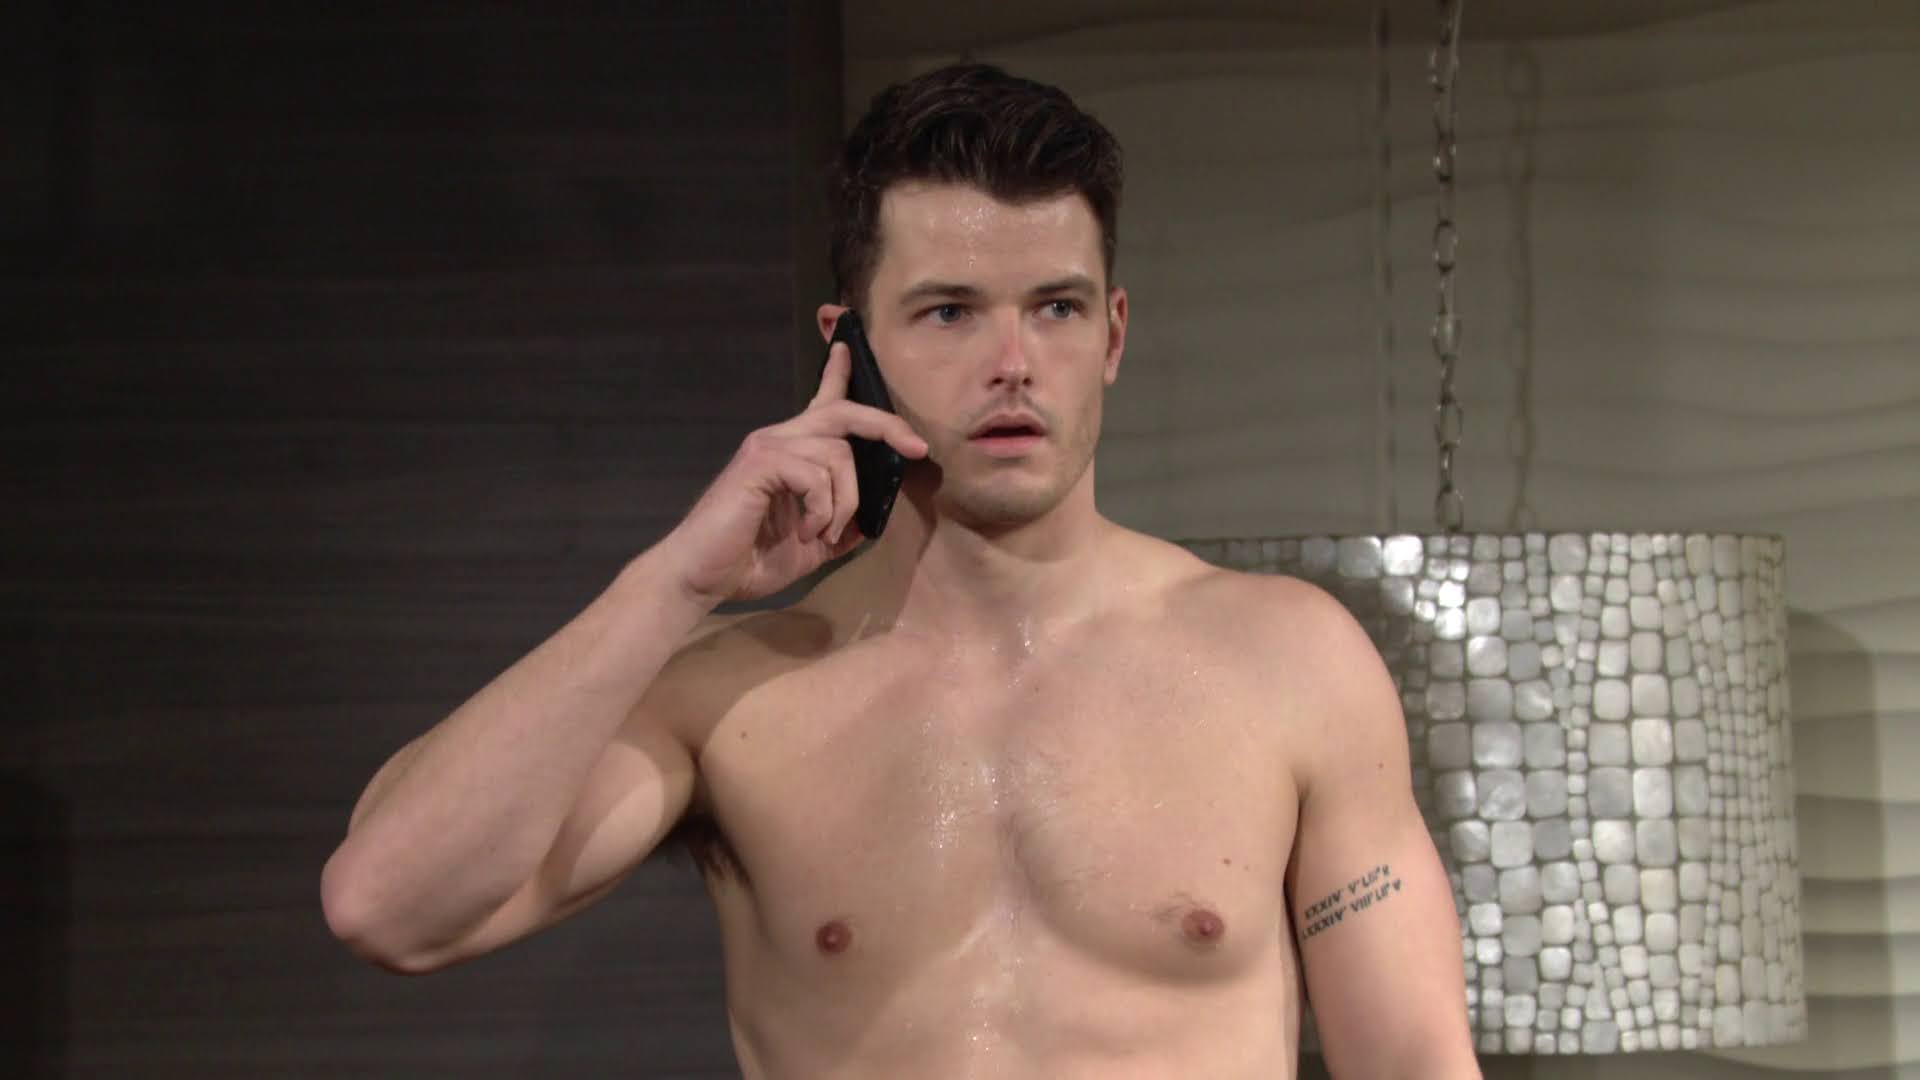 OneoffPost: Michael Mealor Shirtless on Young and the Restless.